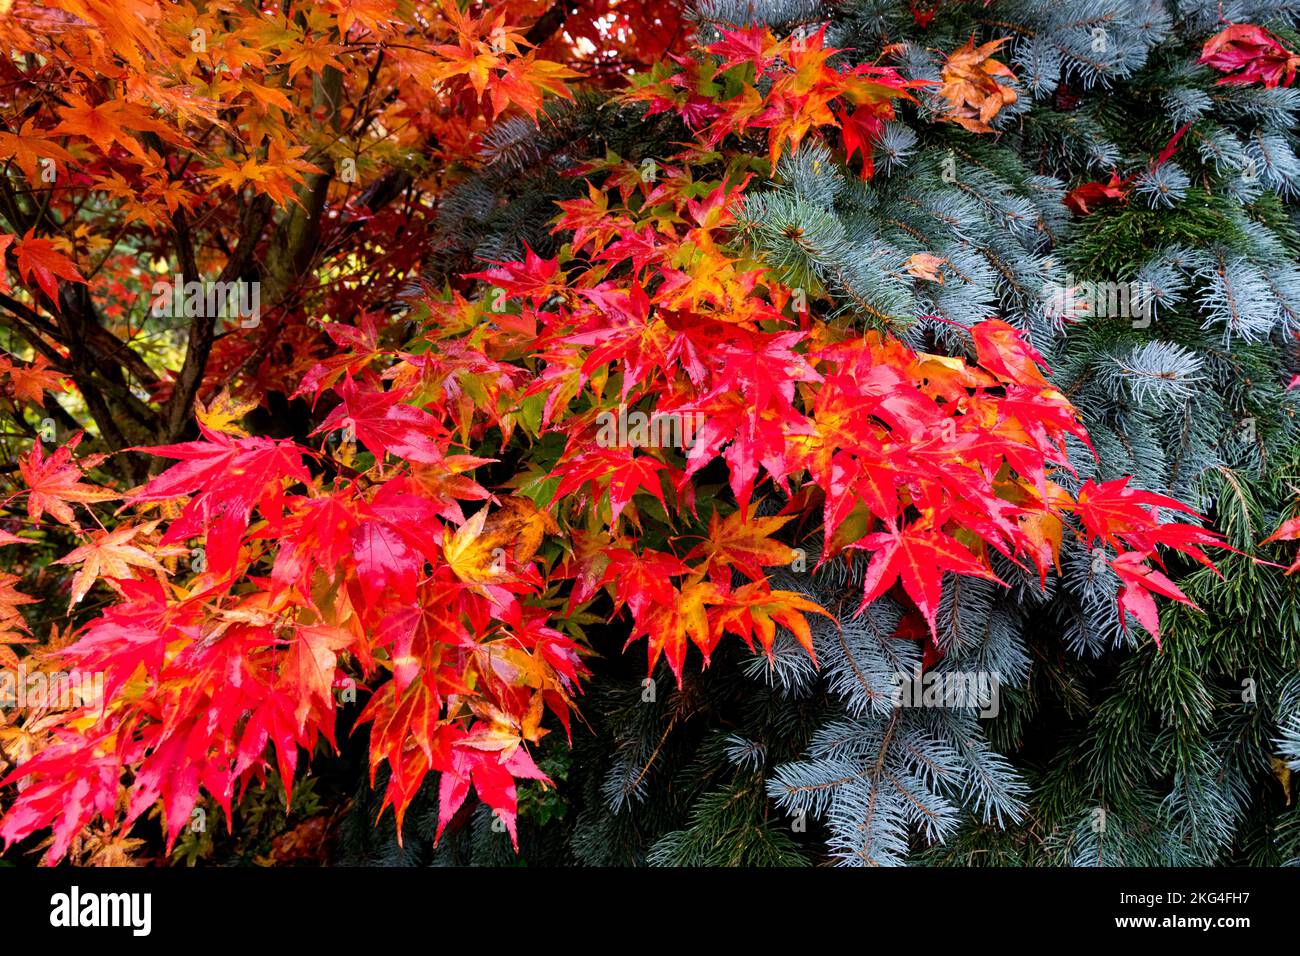 Autumn Japanese Maple Foliage Leaves Red Garden Turning Red Maple Tree Branches Leaves Turn Red Colour Acer palmatum Autumnal Foliage October Colors Stock Photo